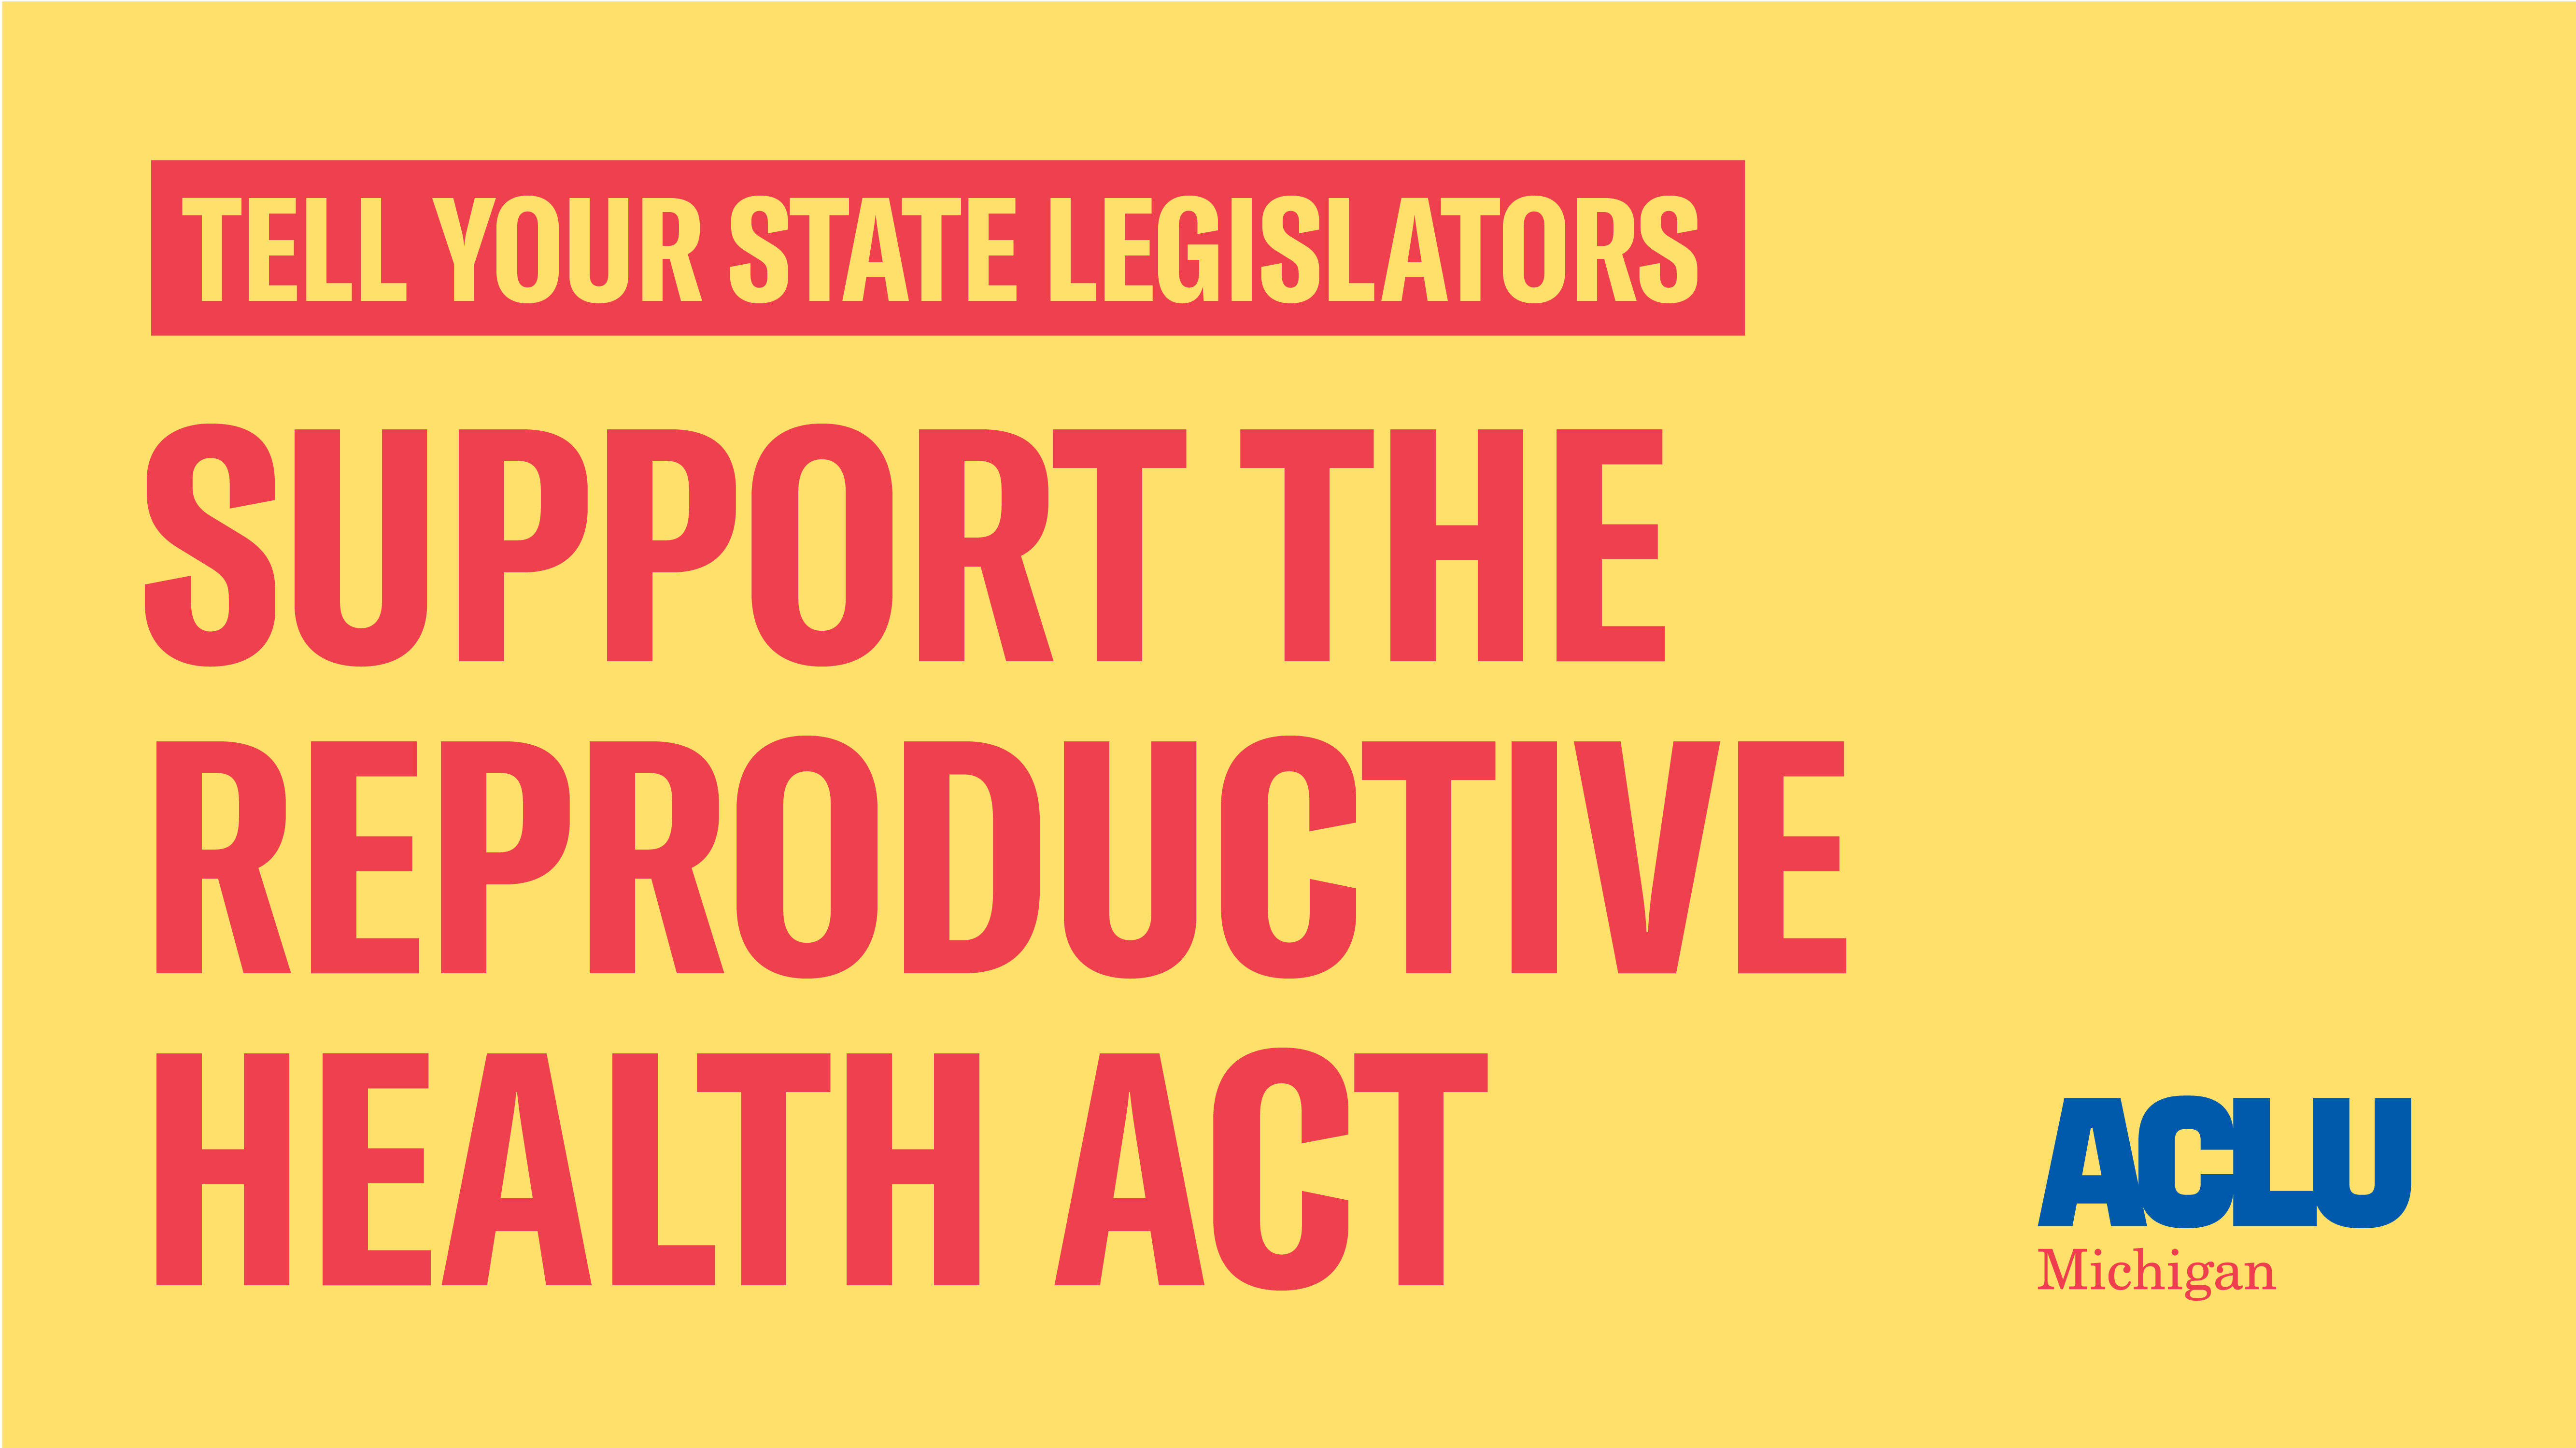 Tell Michigan House Representatives to Support the Reproductive Health